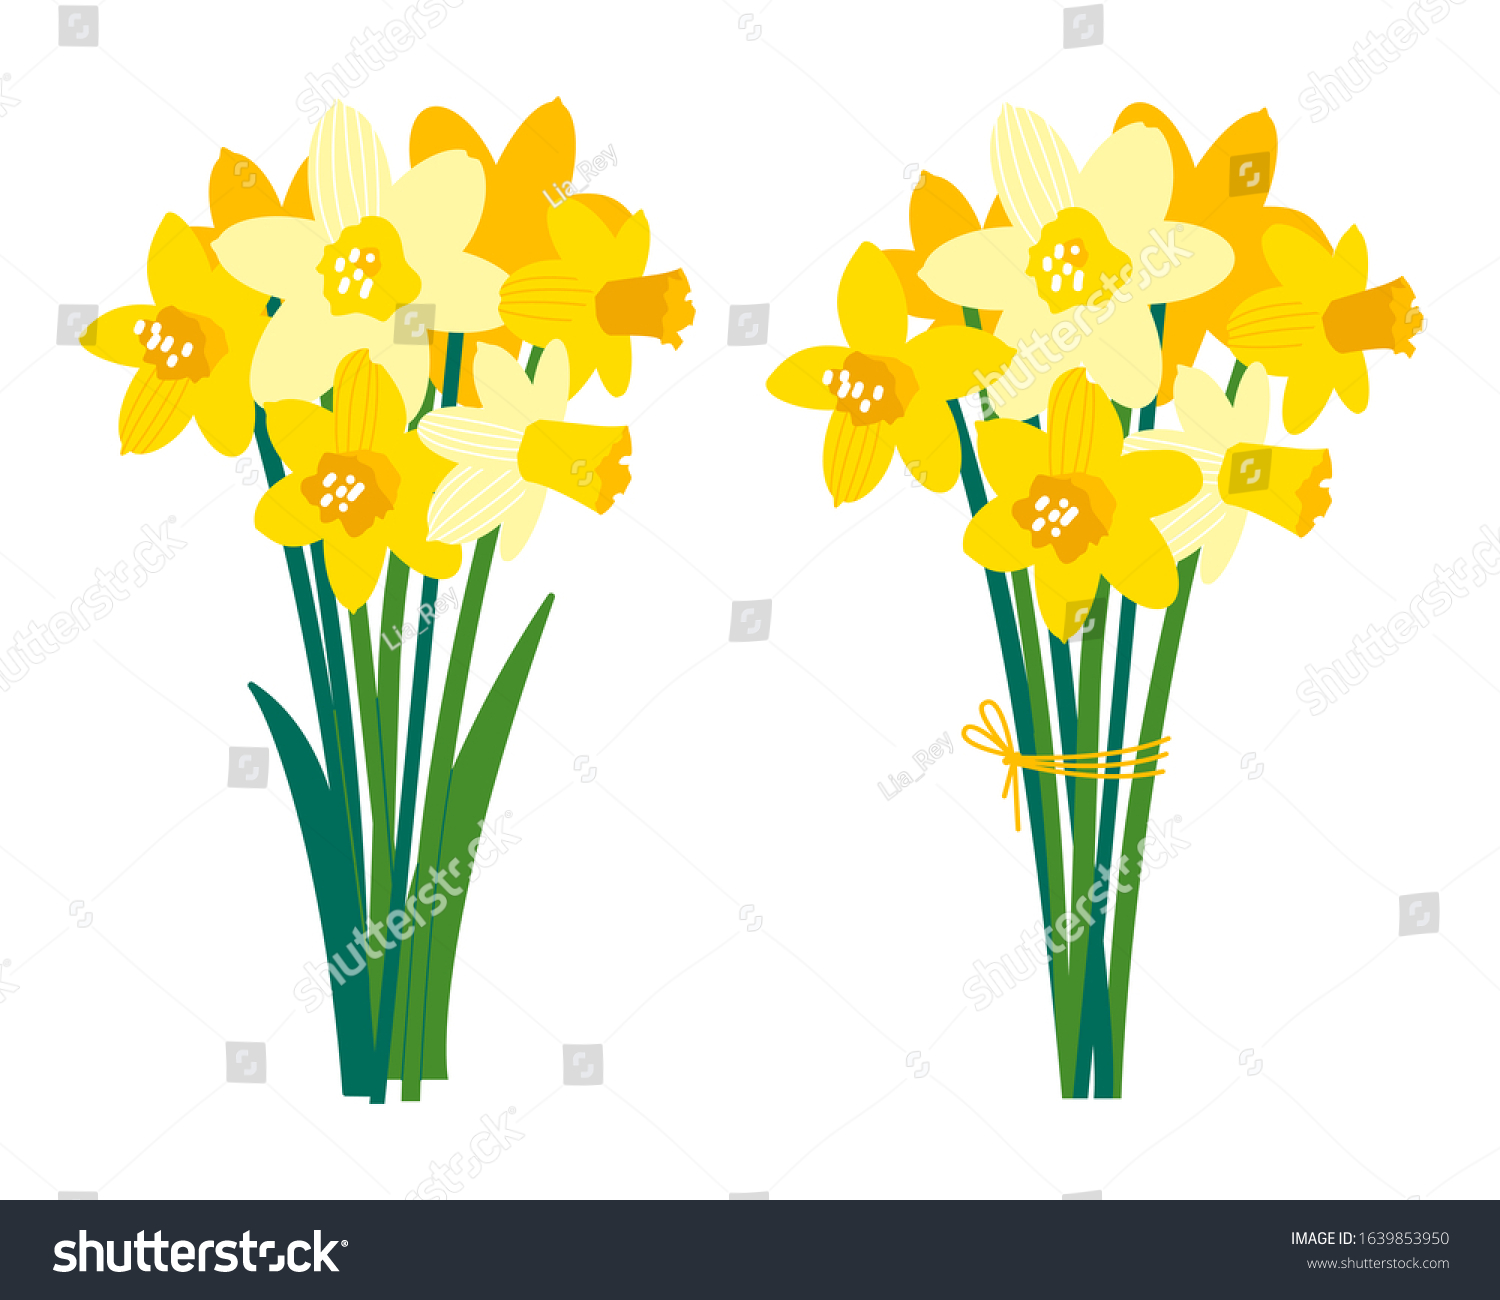 SVG of Vector set of floral illustrations isolated on white. Early spring garden flowers. Yellow narcissus. Growing daffodils. Bouquet for bright festive greeting card, poster, banner. Womens Day svg